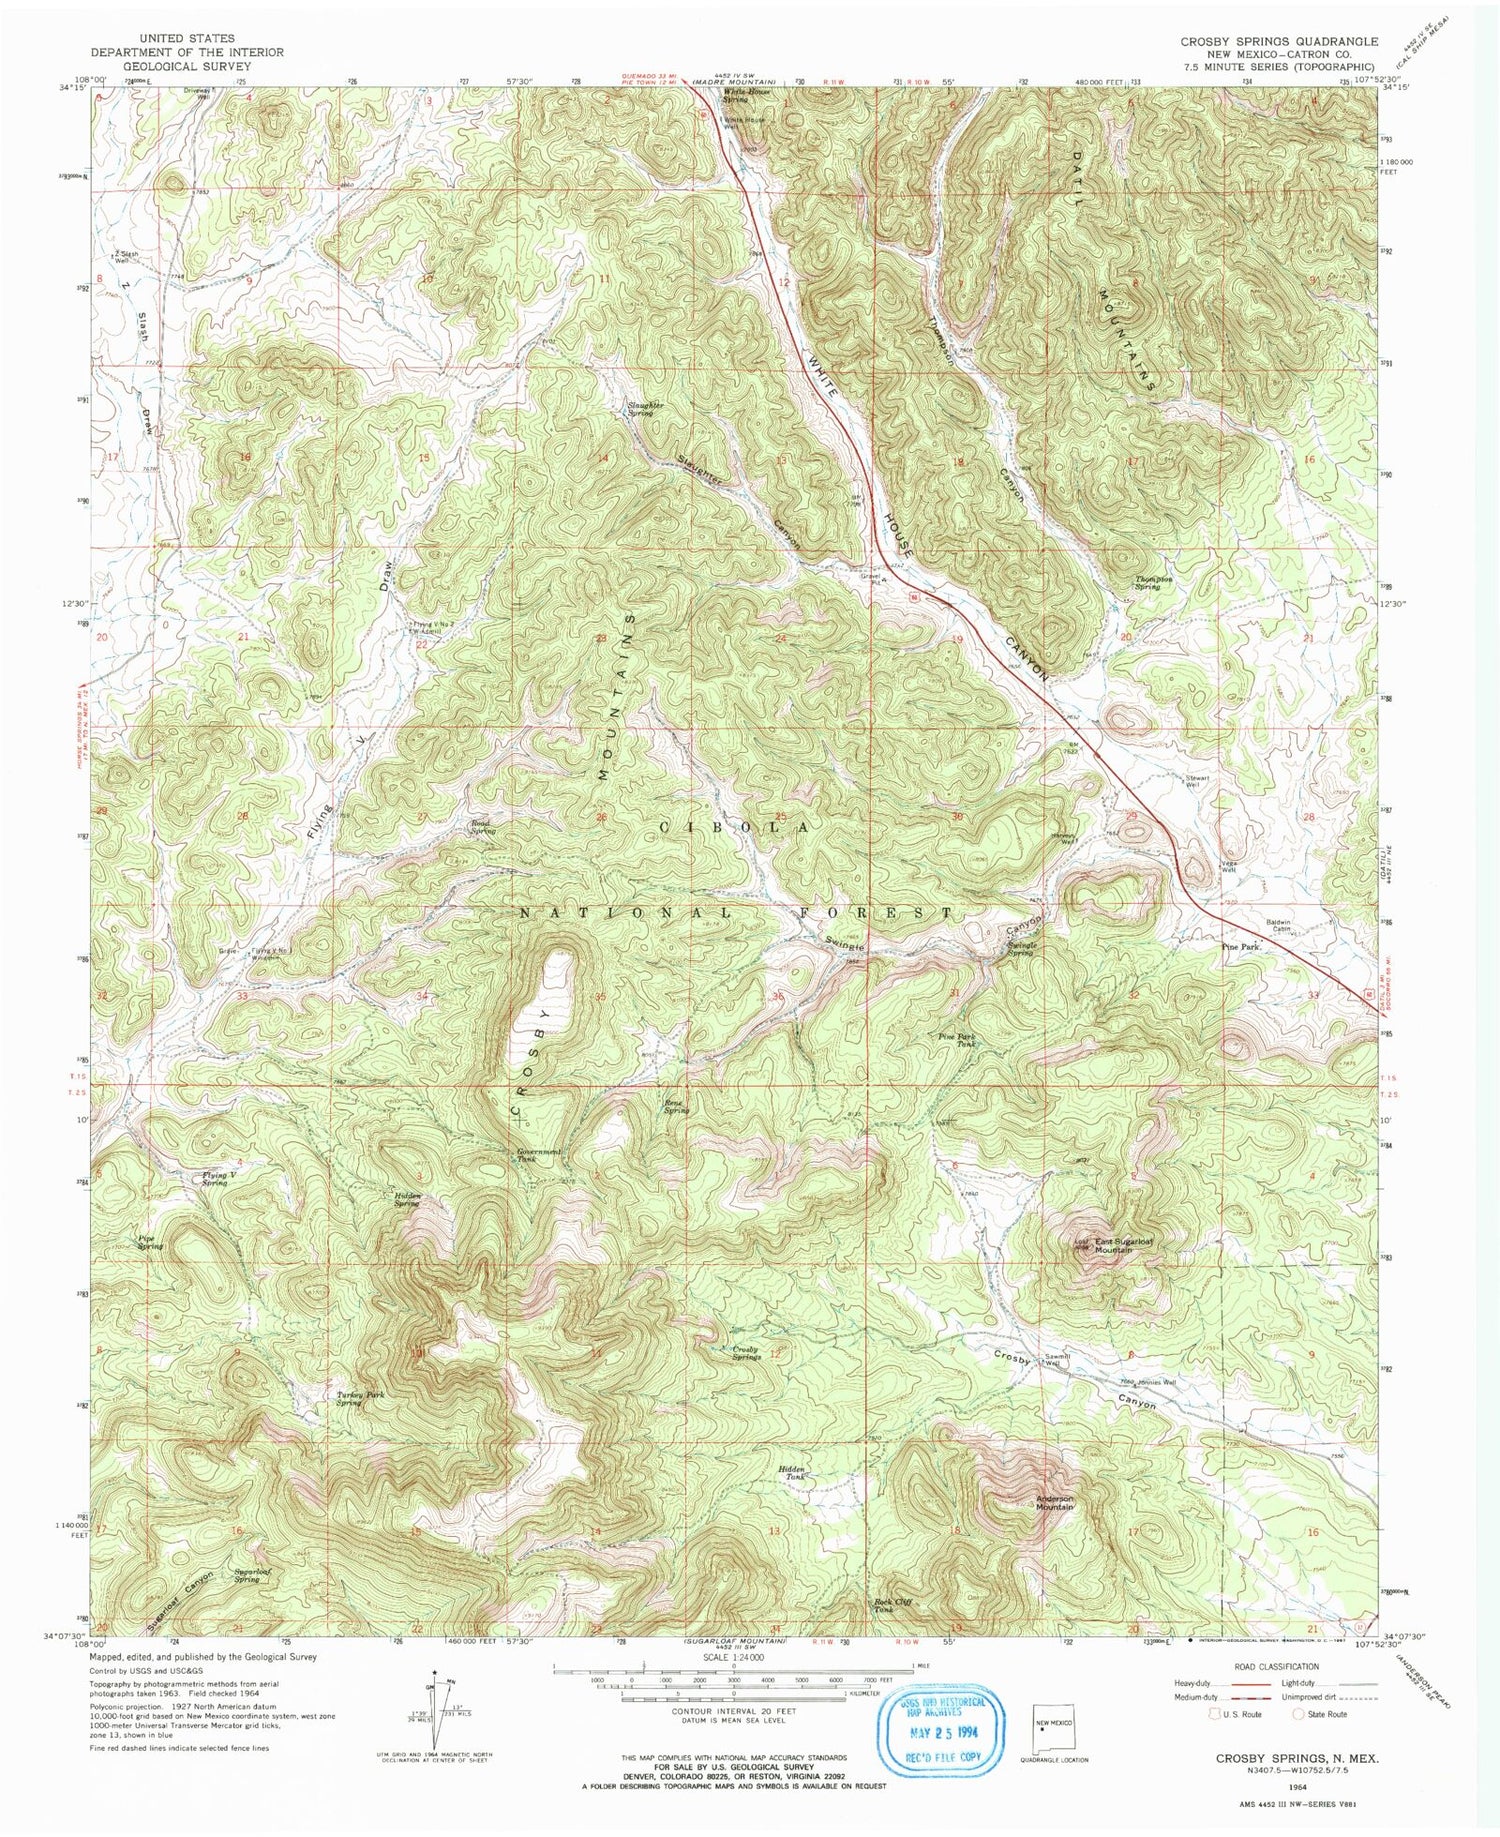 Classic USGS Crosby Springs New Mexico 7.5'x7.5' Topo Map Image